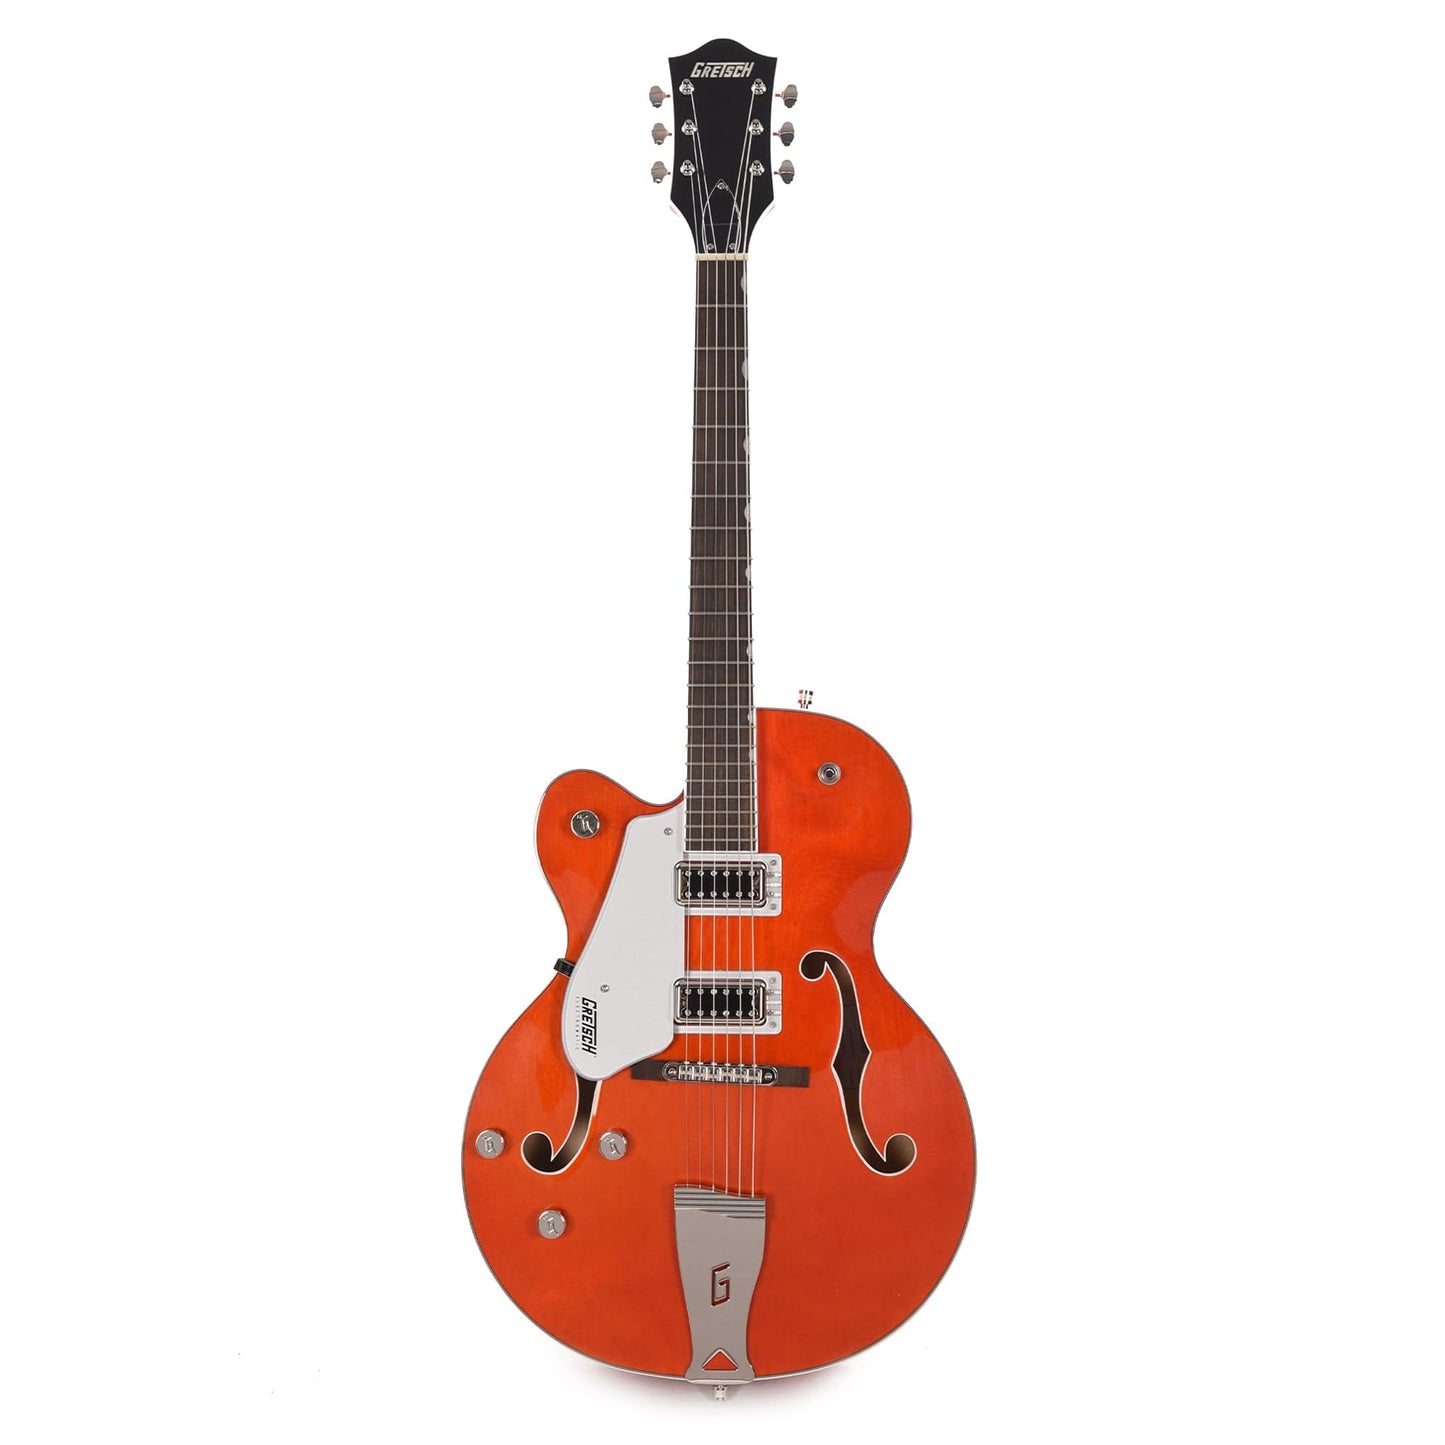 Gretsch G5420 LEFTY Electromatic Hollow-Body Single Cut Orange Stain Electric Guitars / Left-Handed